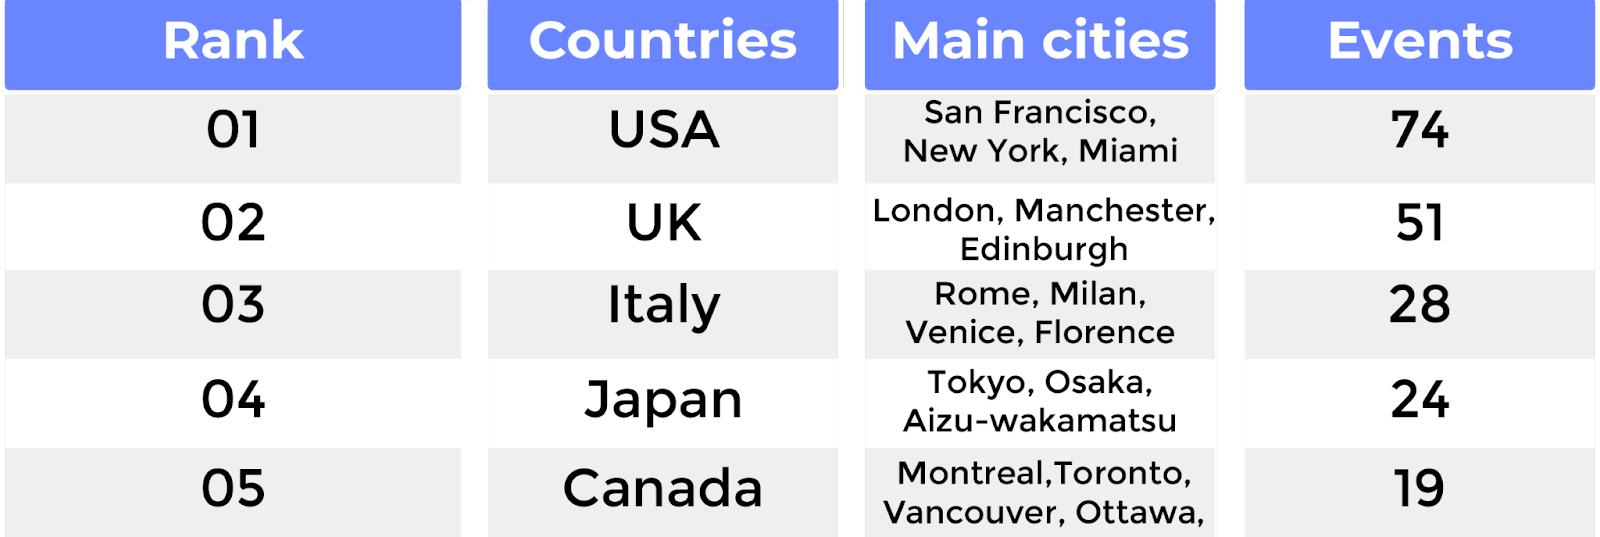 Rank, Countries, Main cities, Events